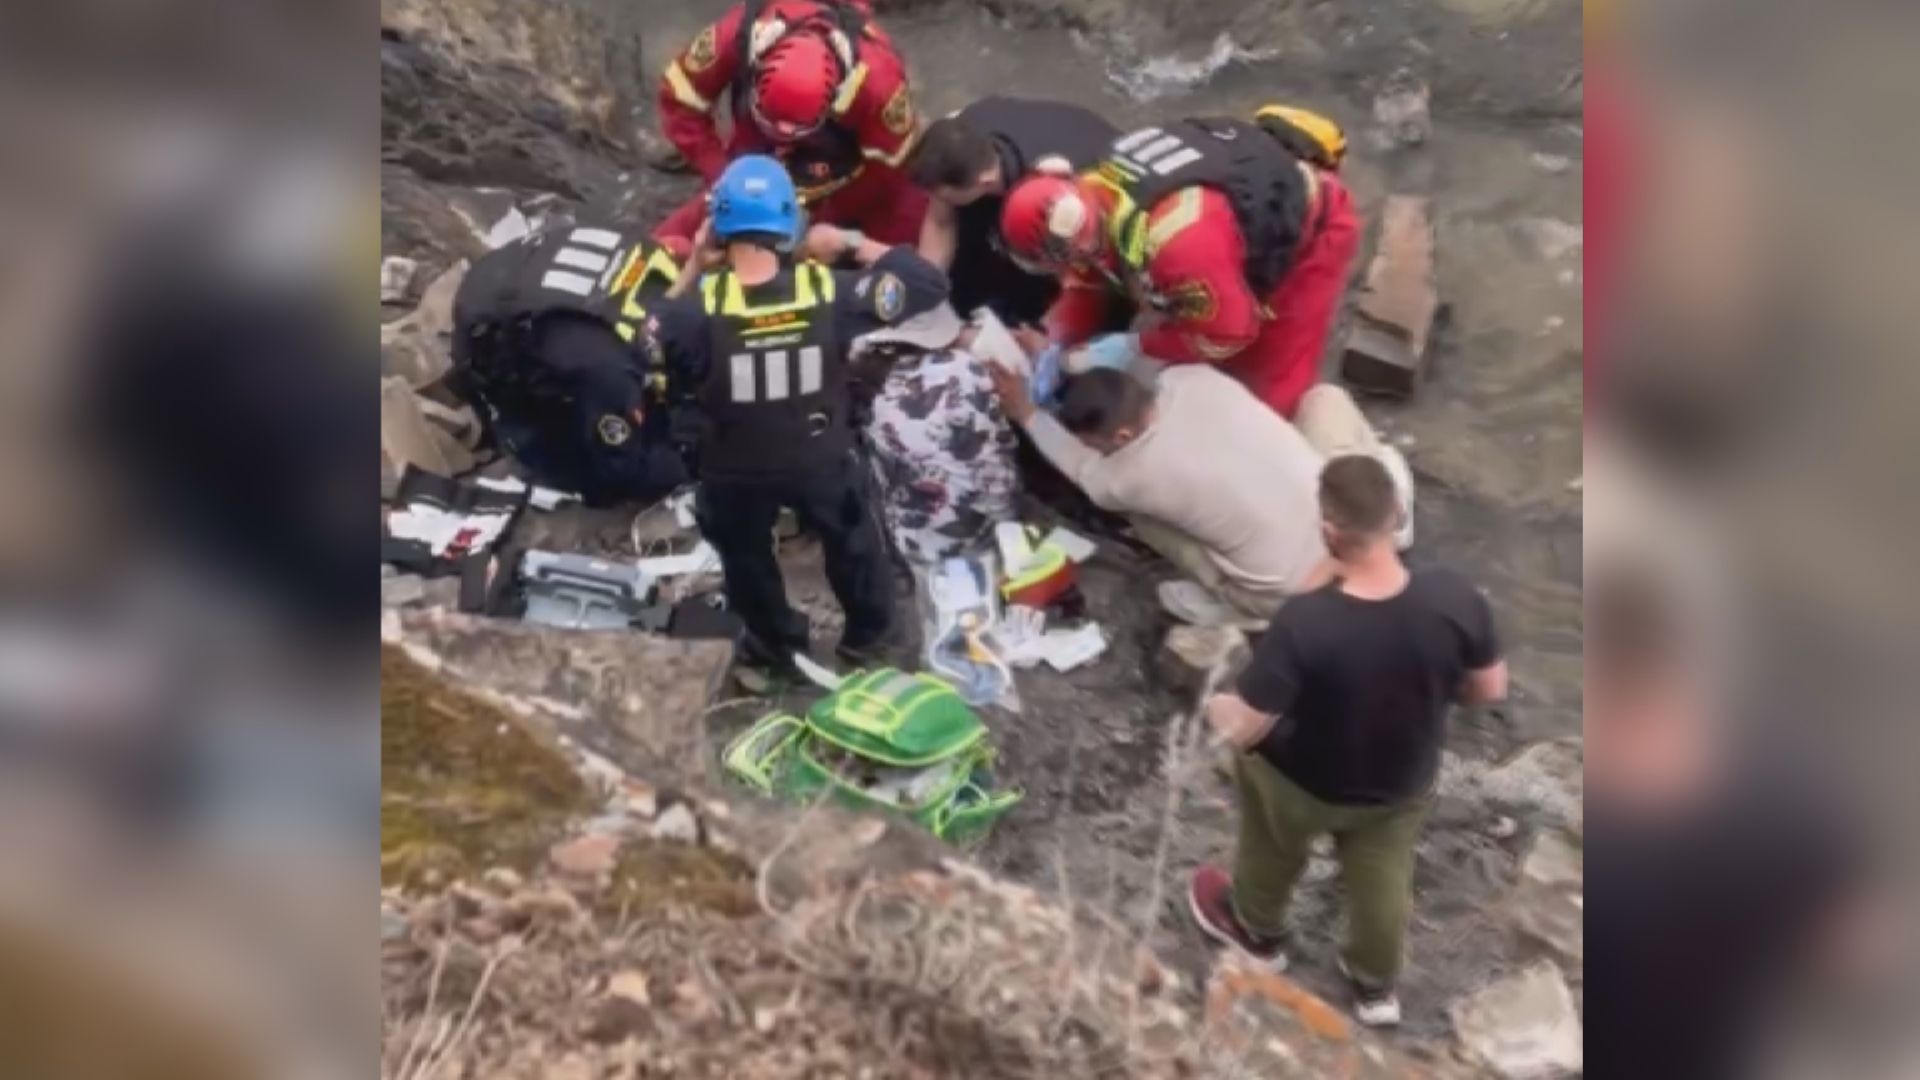 Calgary man who fell from 6-storey ledge recovering ‘remarkably well’